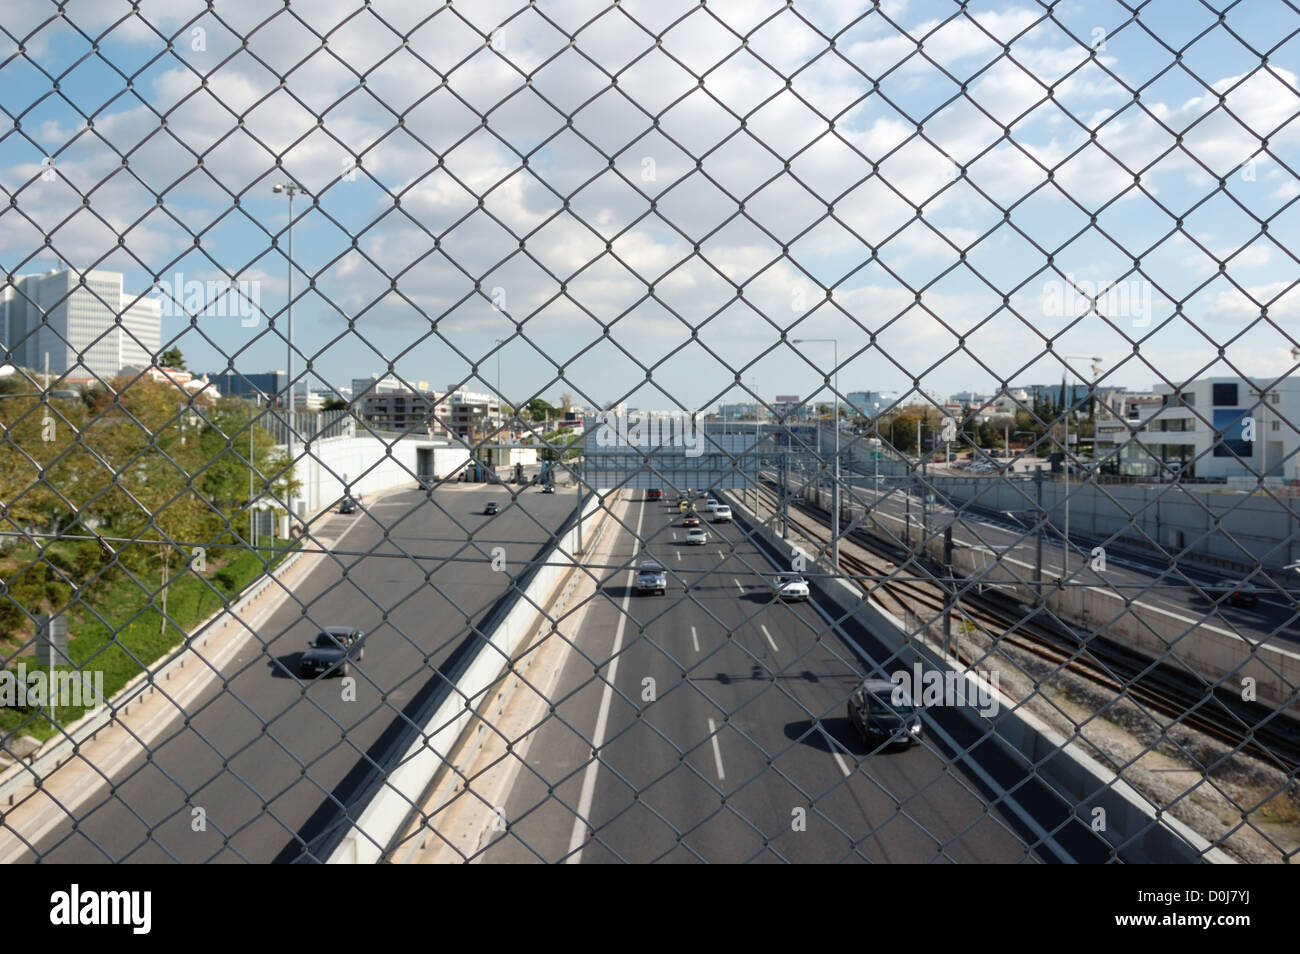 Cars on the motorway and chain link fence. City traffic. Stock Photo